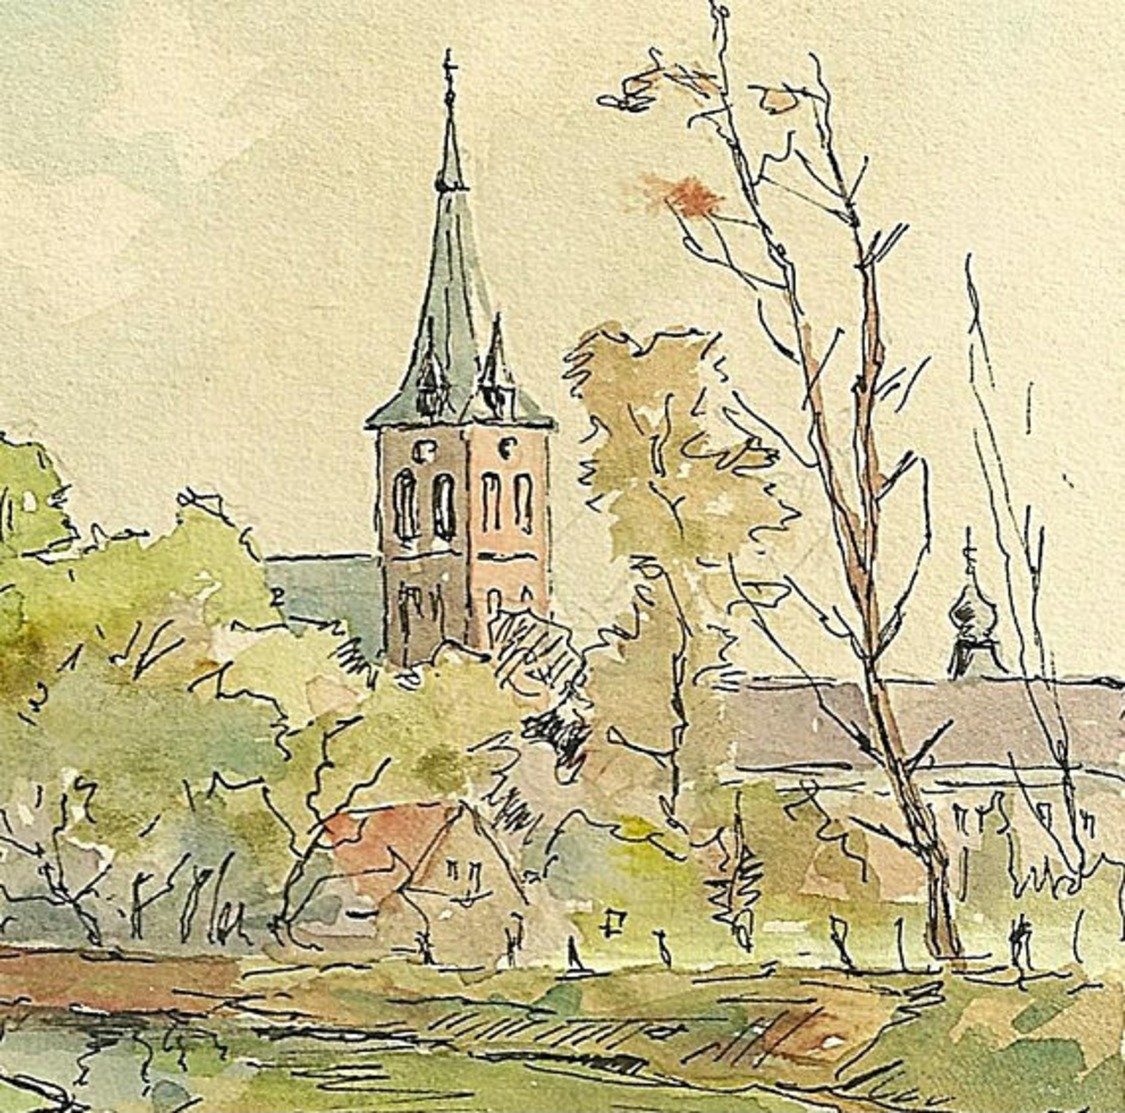 Landscape Watercolour - Old Spire Church - Vintage Landscape Painting 1962 - Pen & Ink Drawing - French - German. - Watercolours